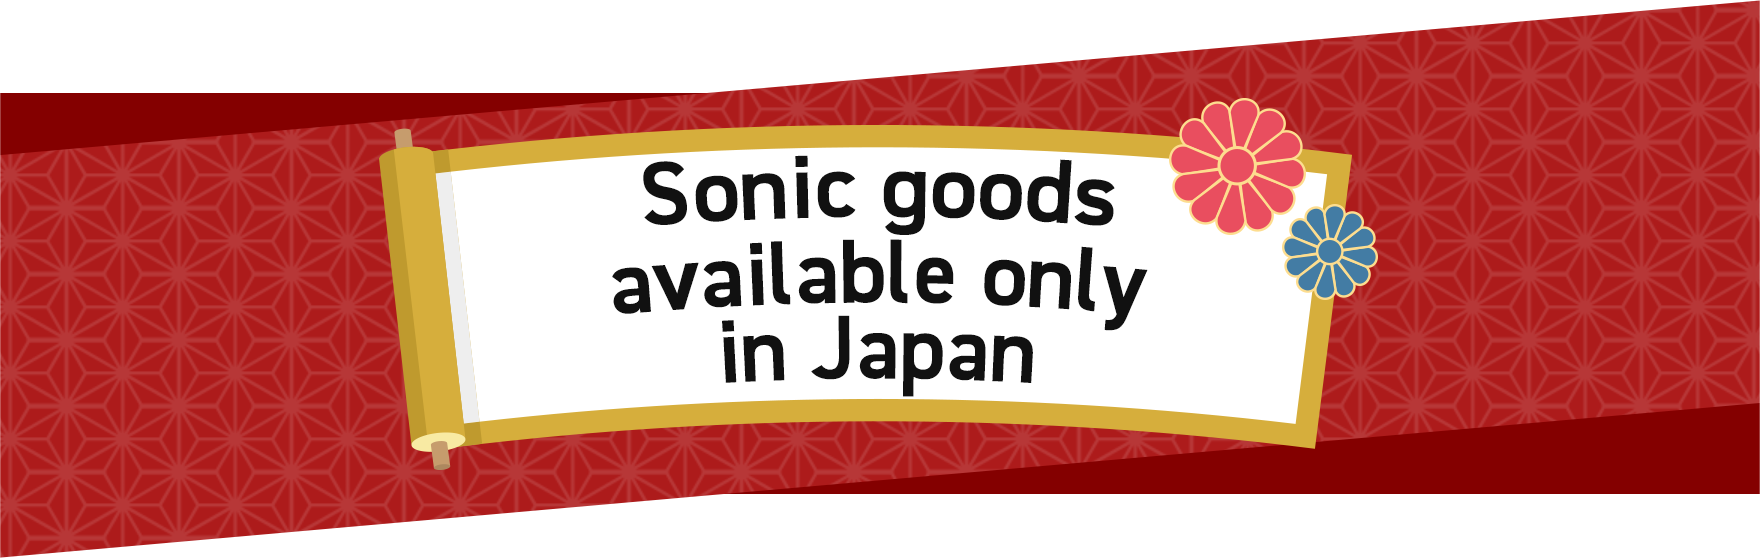 Sonic goods available only in Japan